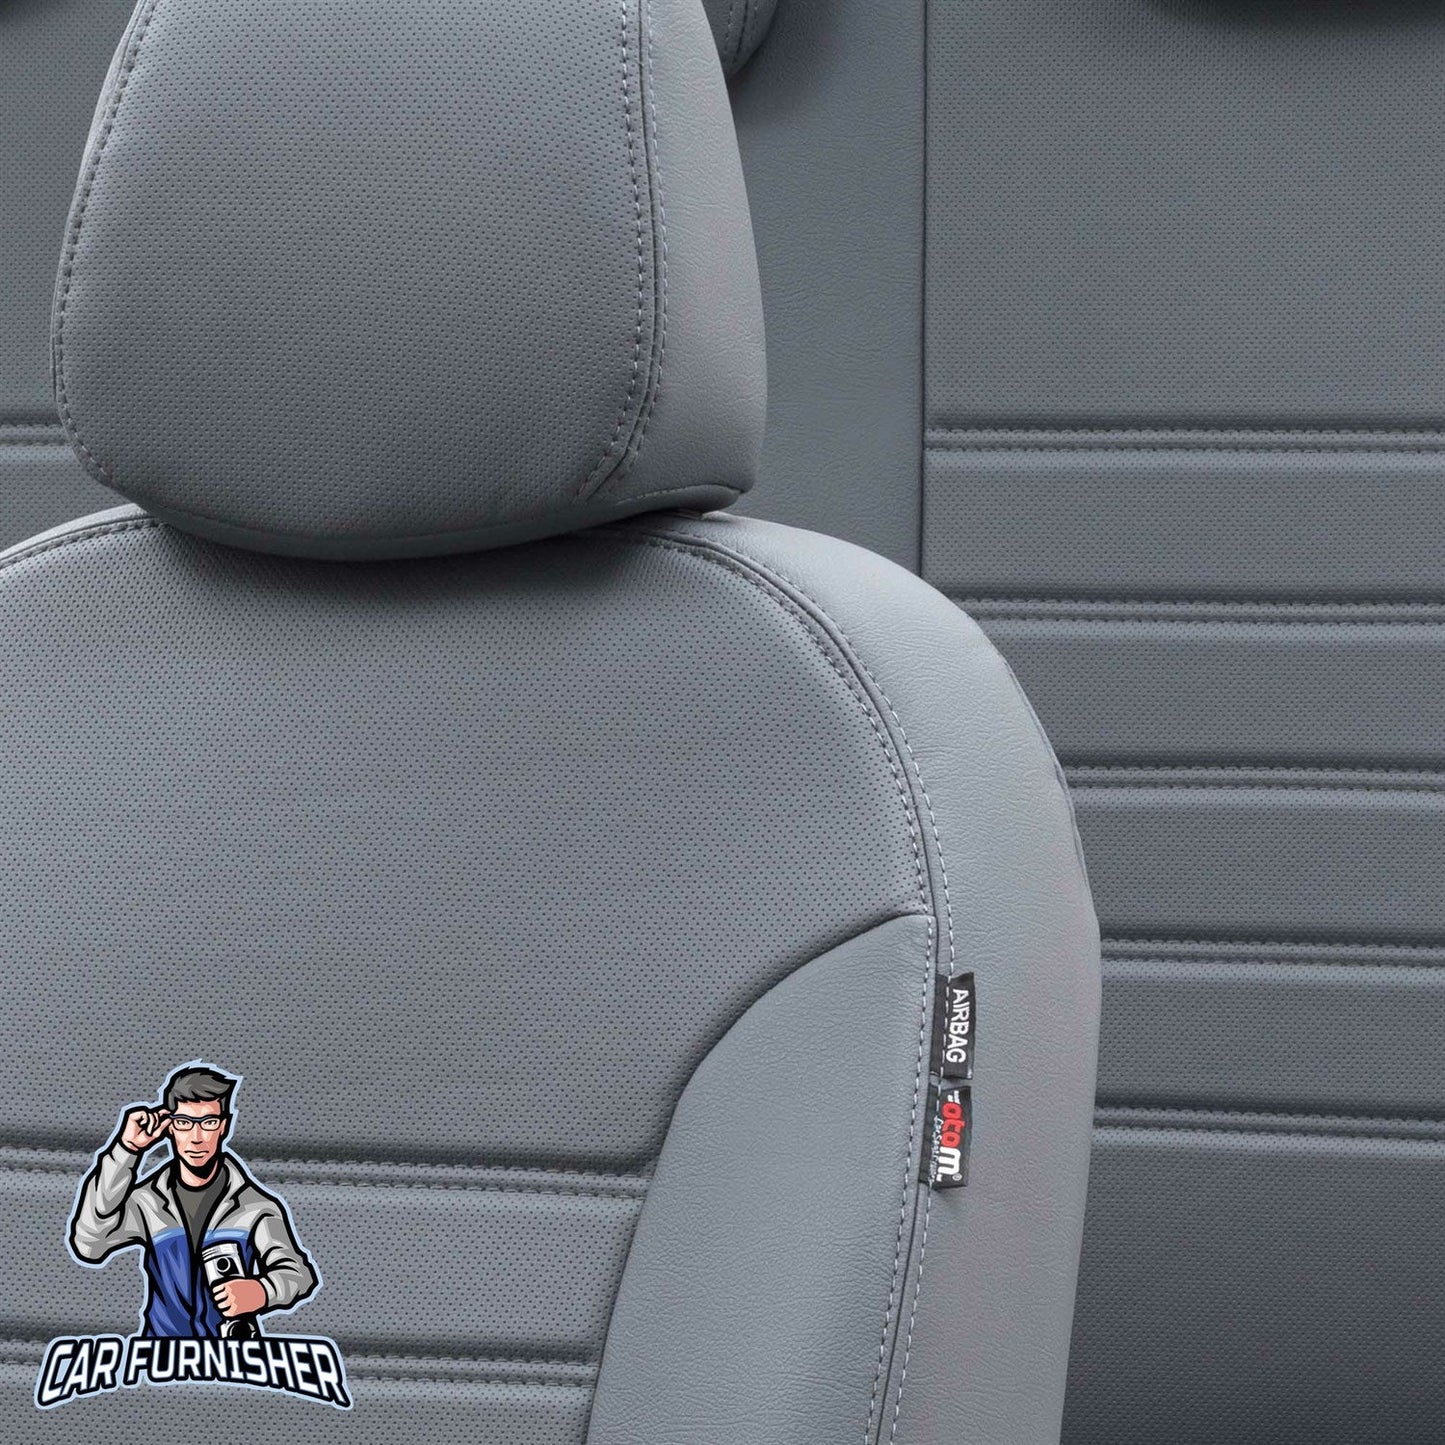 Mercedes Citan Seat Covers Istanbul Leather Design Smoked Leather